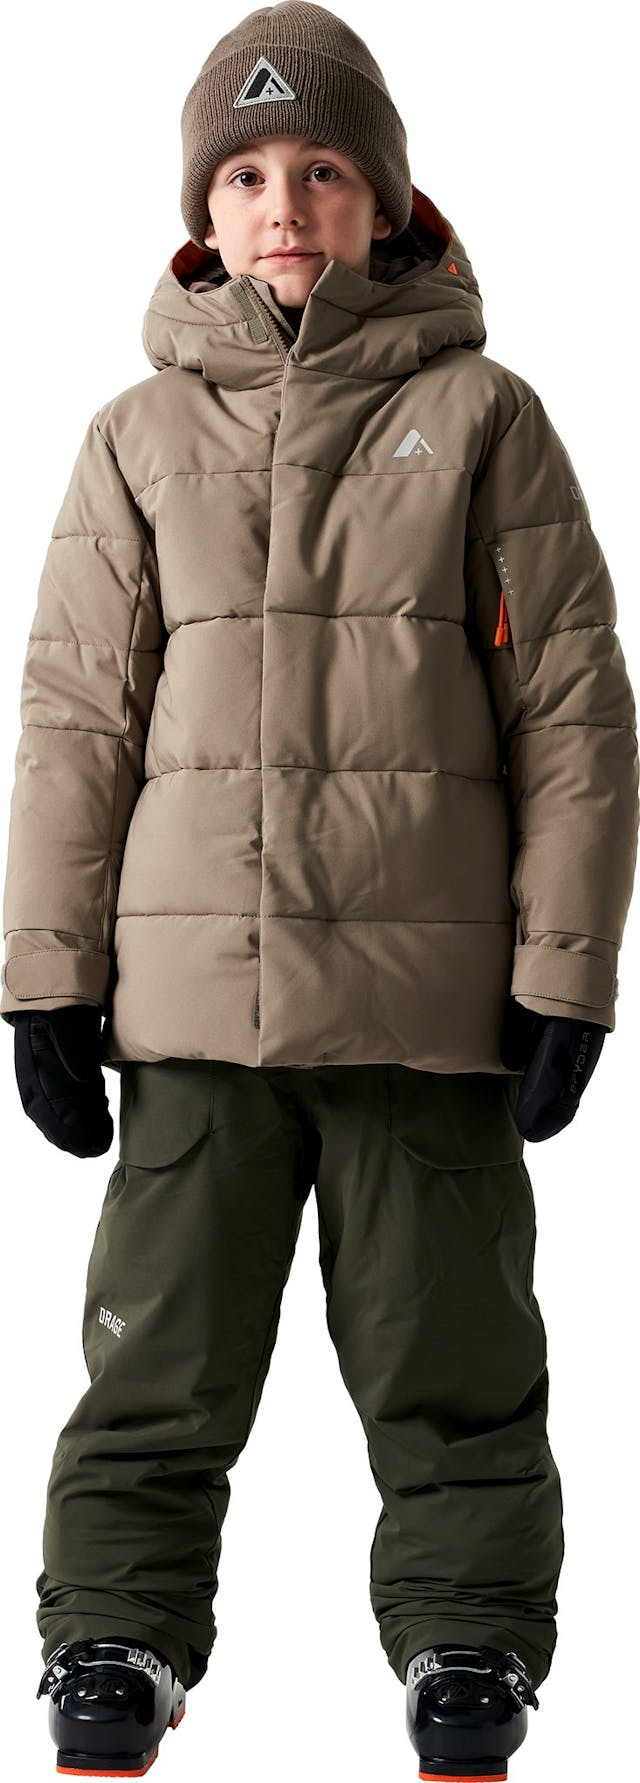 Product image for Redford Synthetic Down Jacket - Boys